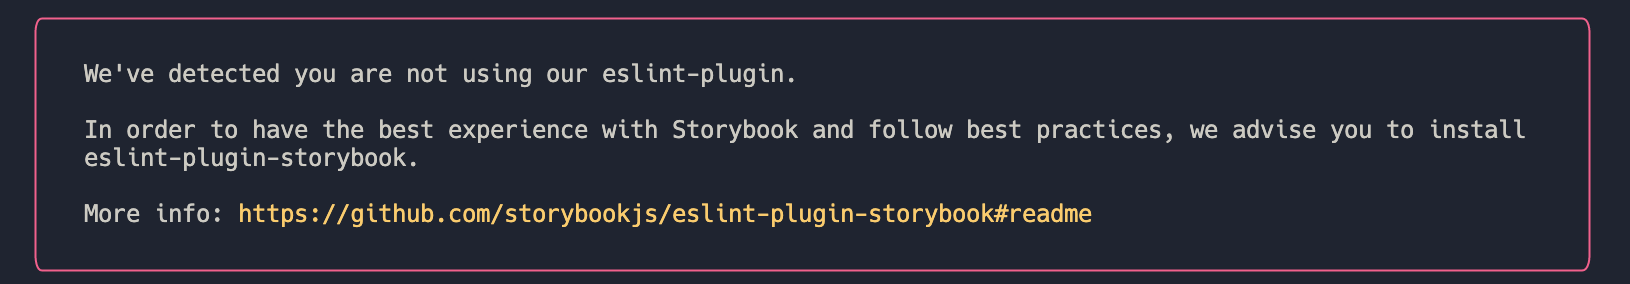 We've detected you are not using our eslint-plugin.                                                        │ │                                                                                                              │ │   In order to have the best experience with Storybook and follow best practices, we advise you to install    │ │   eslint-plugin-storybook.                                                                                   │ │                                                                                                              │ │   More info: https://github.com/storybookjs/eslint-plugin-storybook#readme